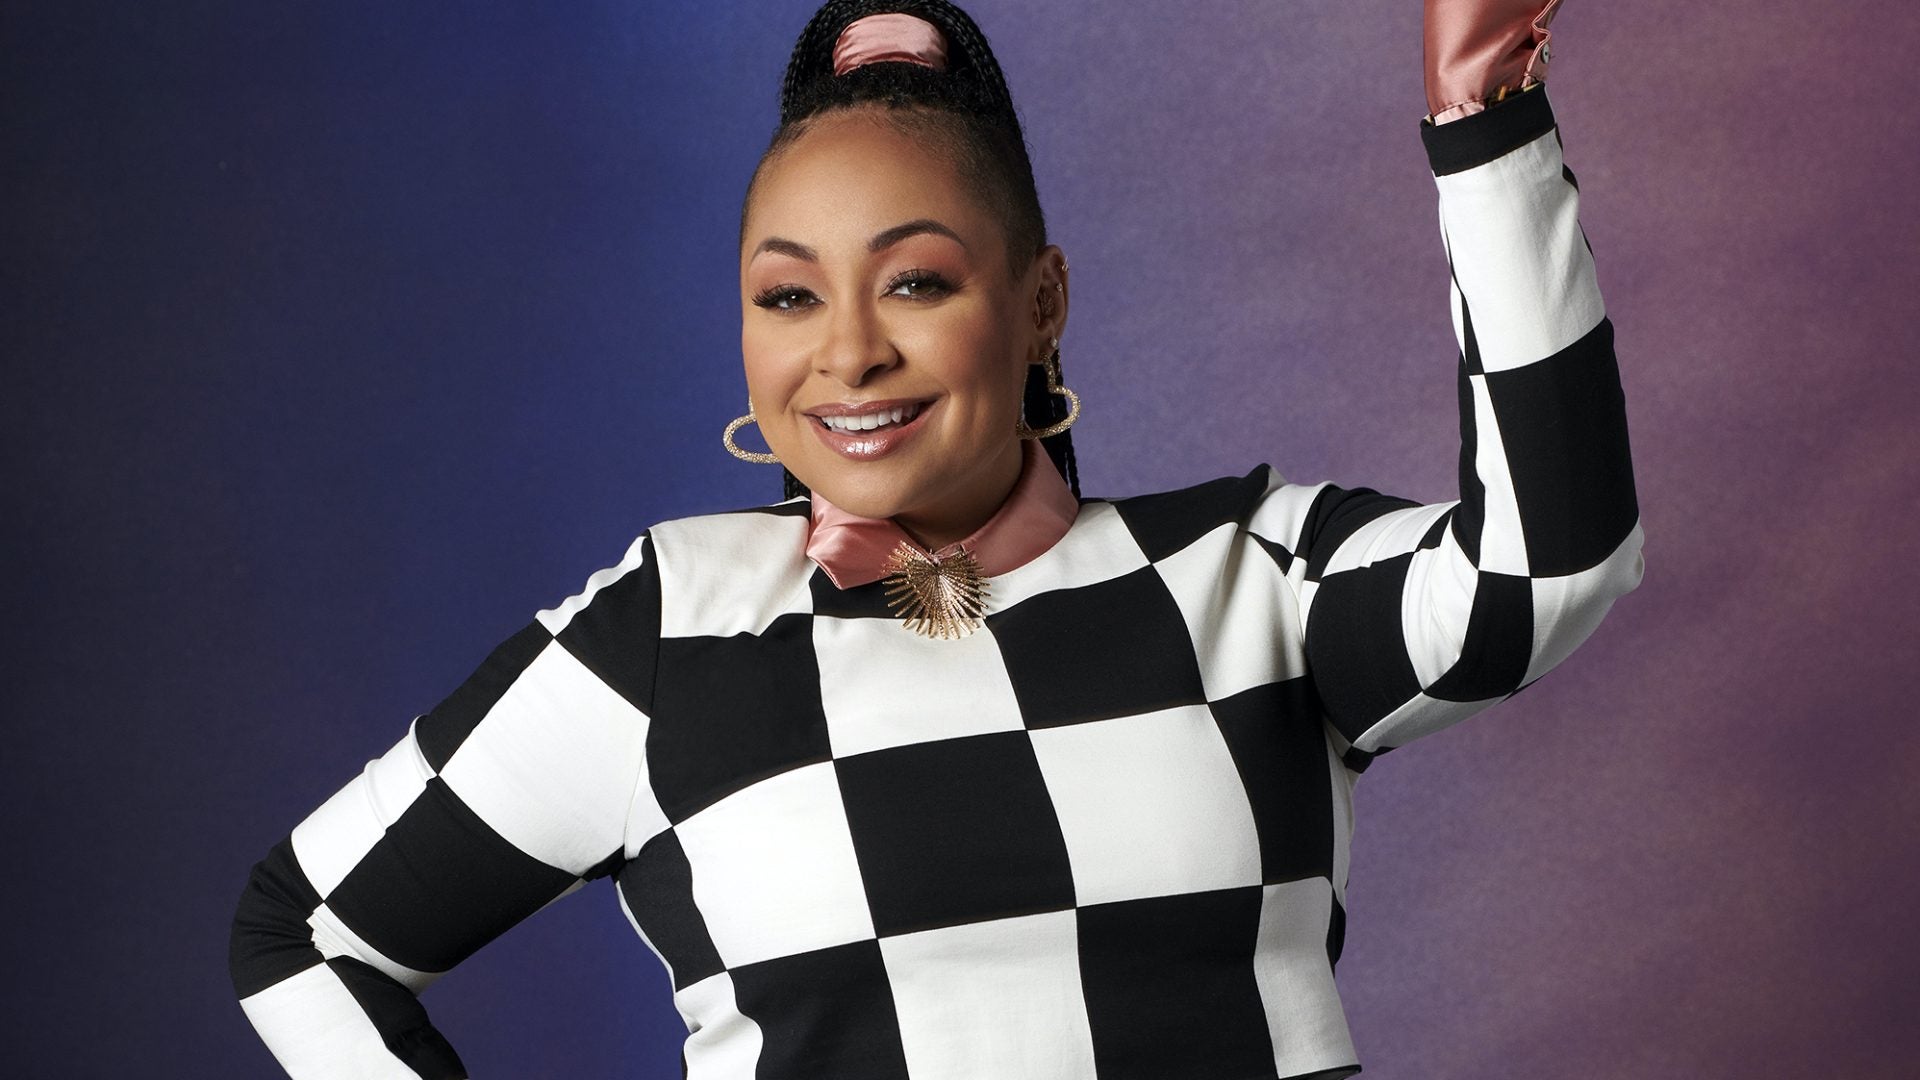 Raven-Symoné Talks Returning To Her Roots With 'Raven's Home'